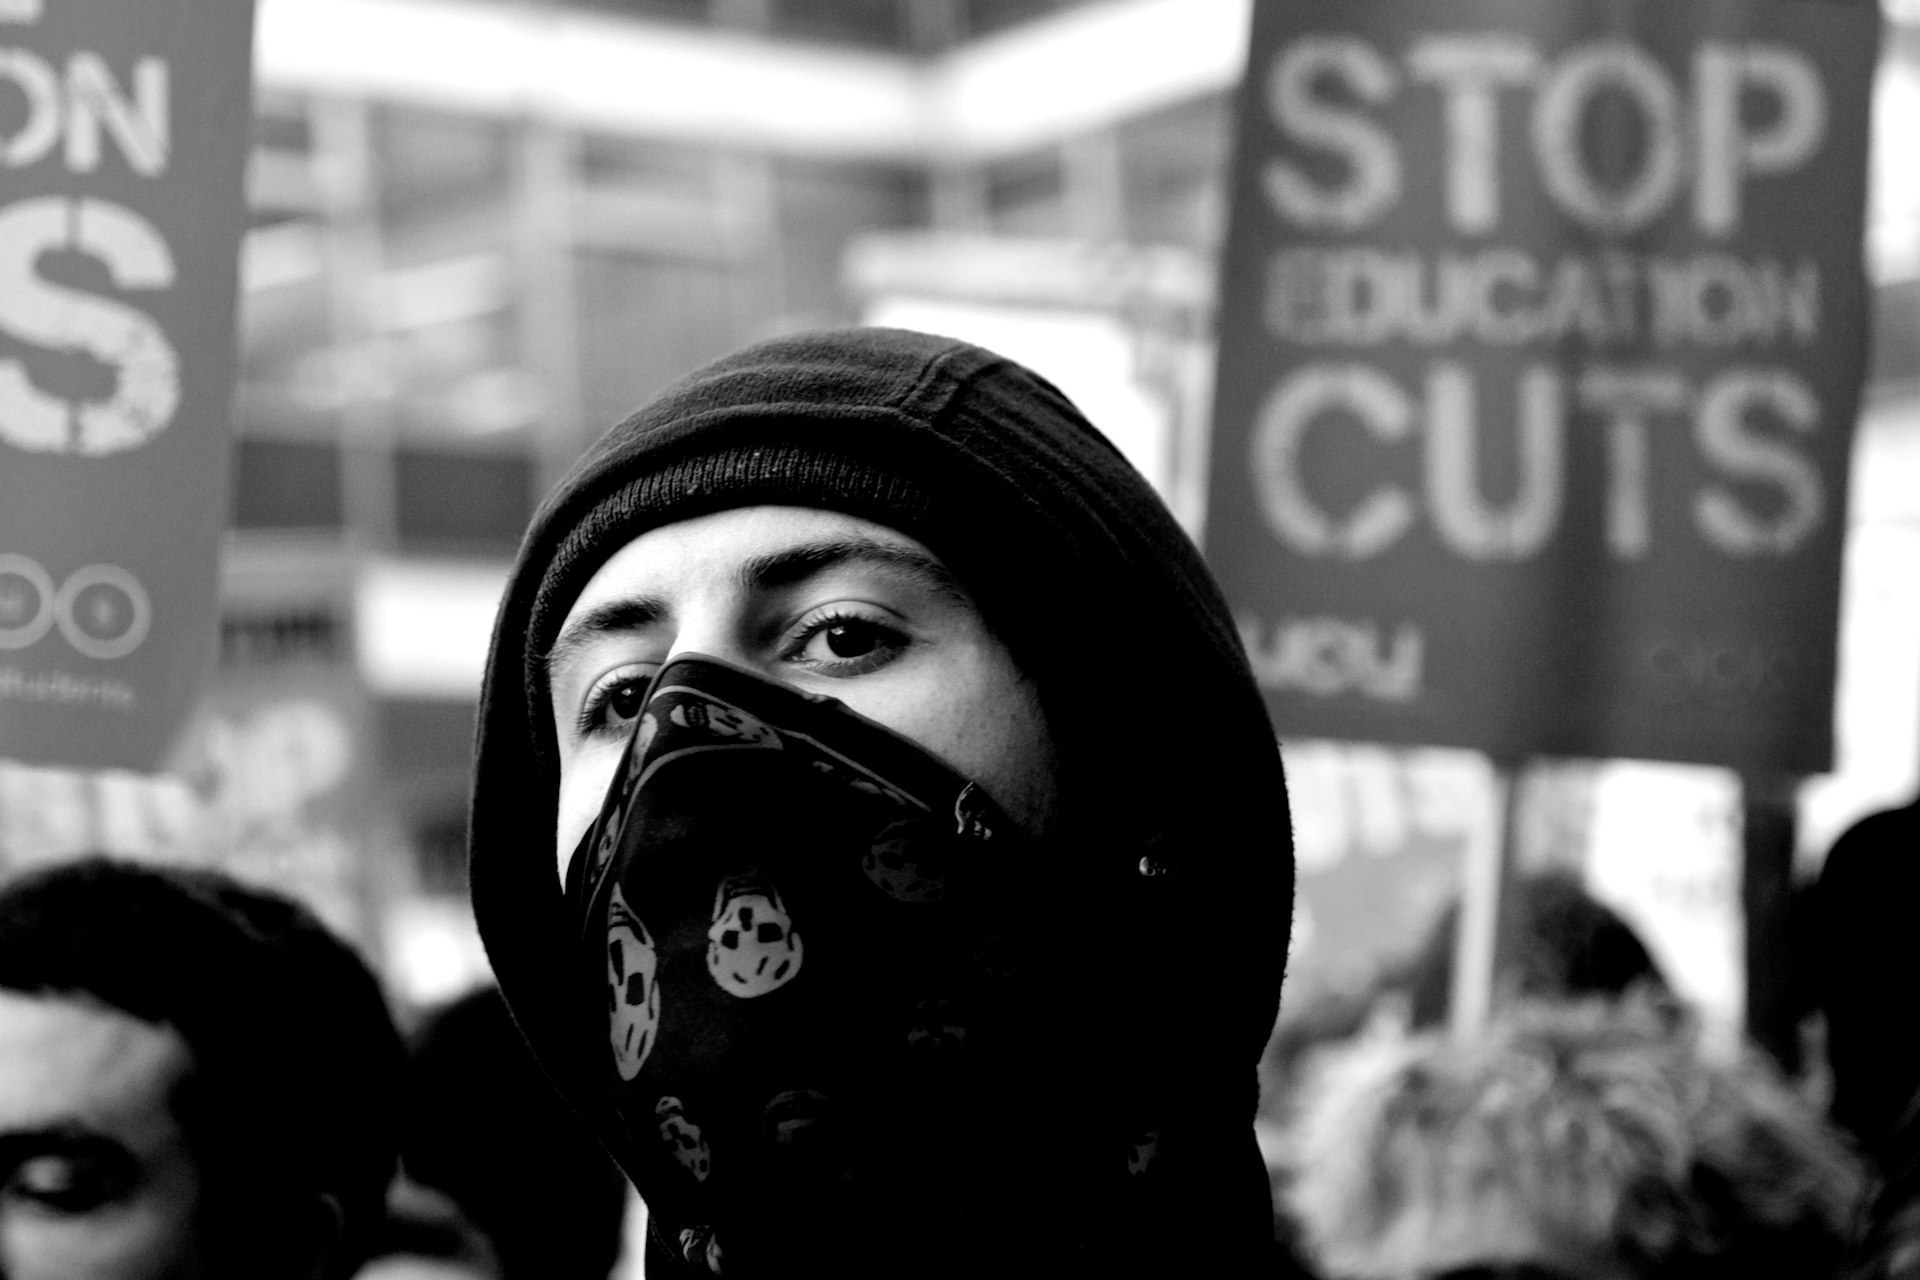 How the 2010 student protests radicalised me